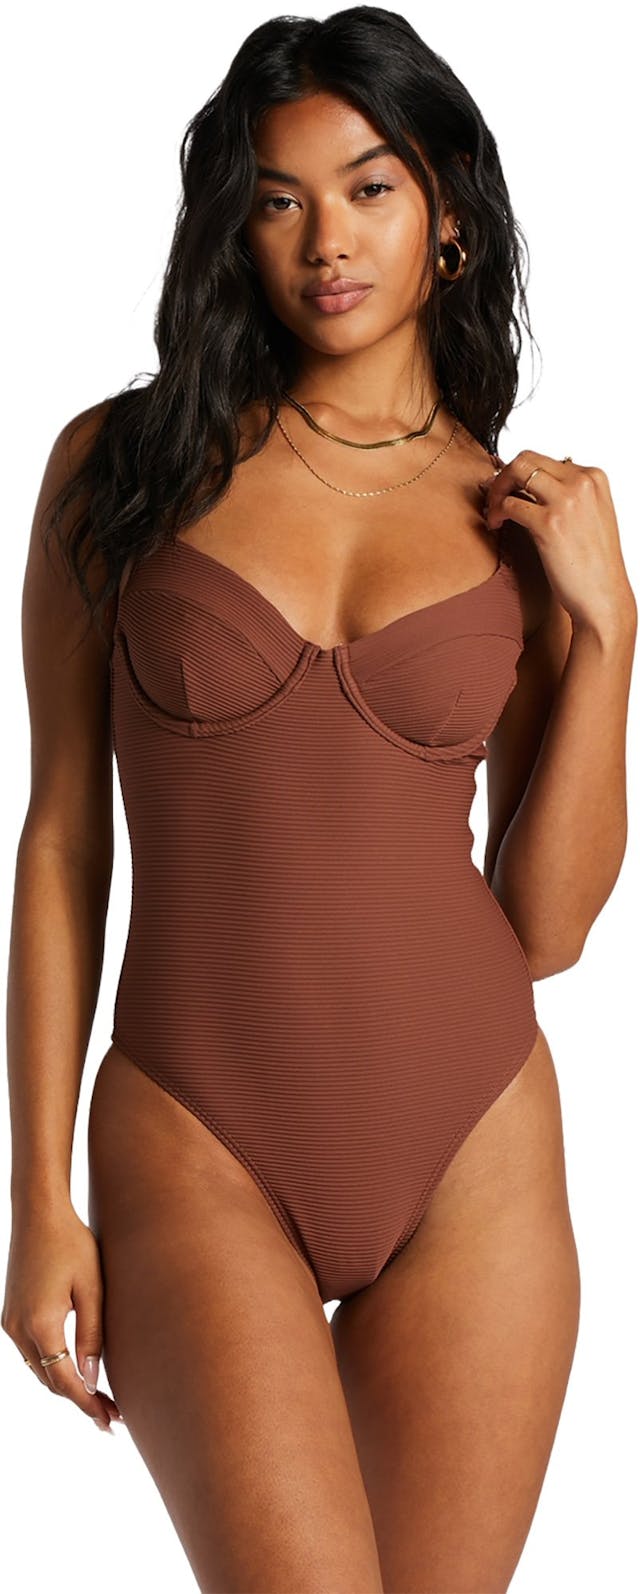 Product image for Tanlines One-Piece Swimsuit - Women's